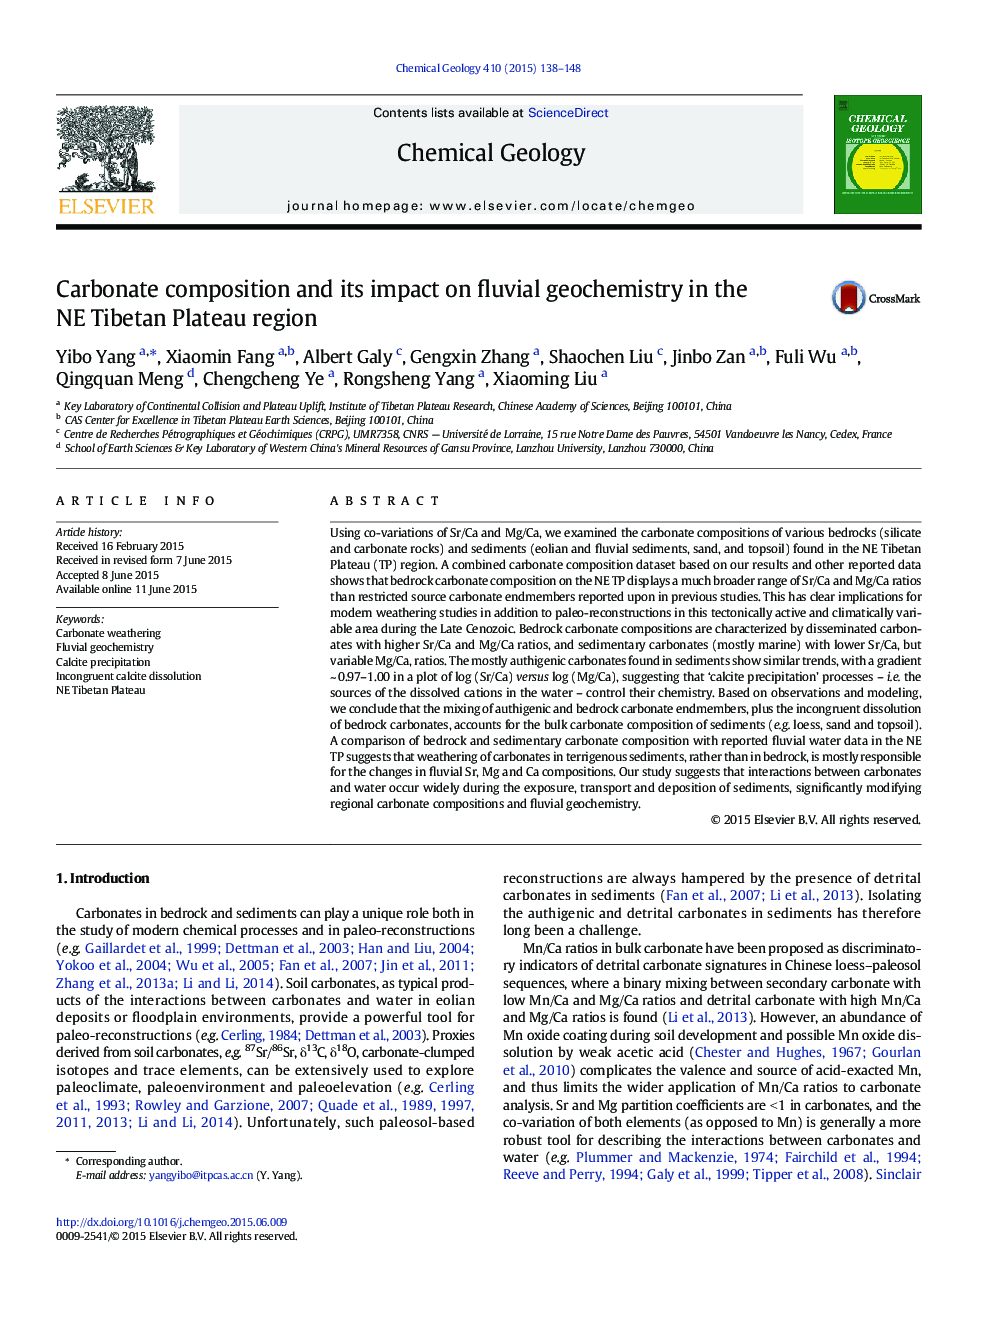 Carbonate composition and its impact on fluvial geochemistry in the NE Tibetan Plateau region